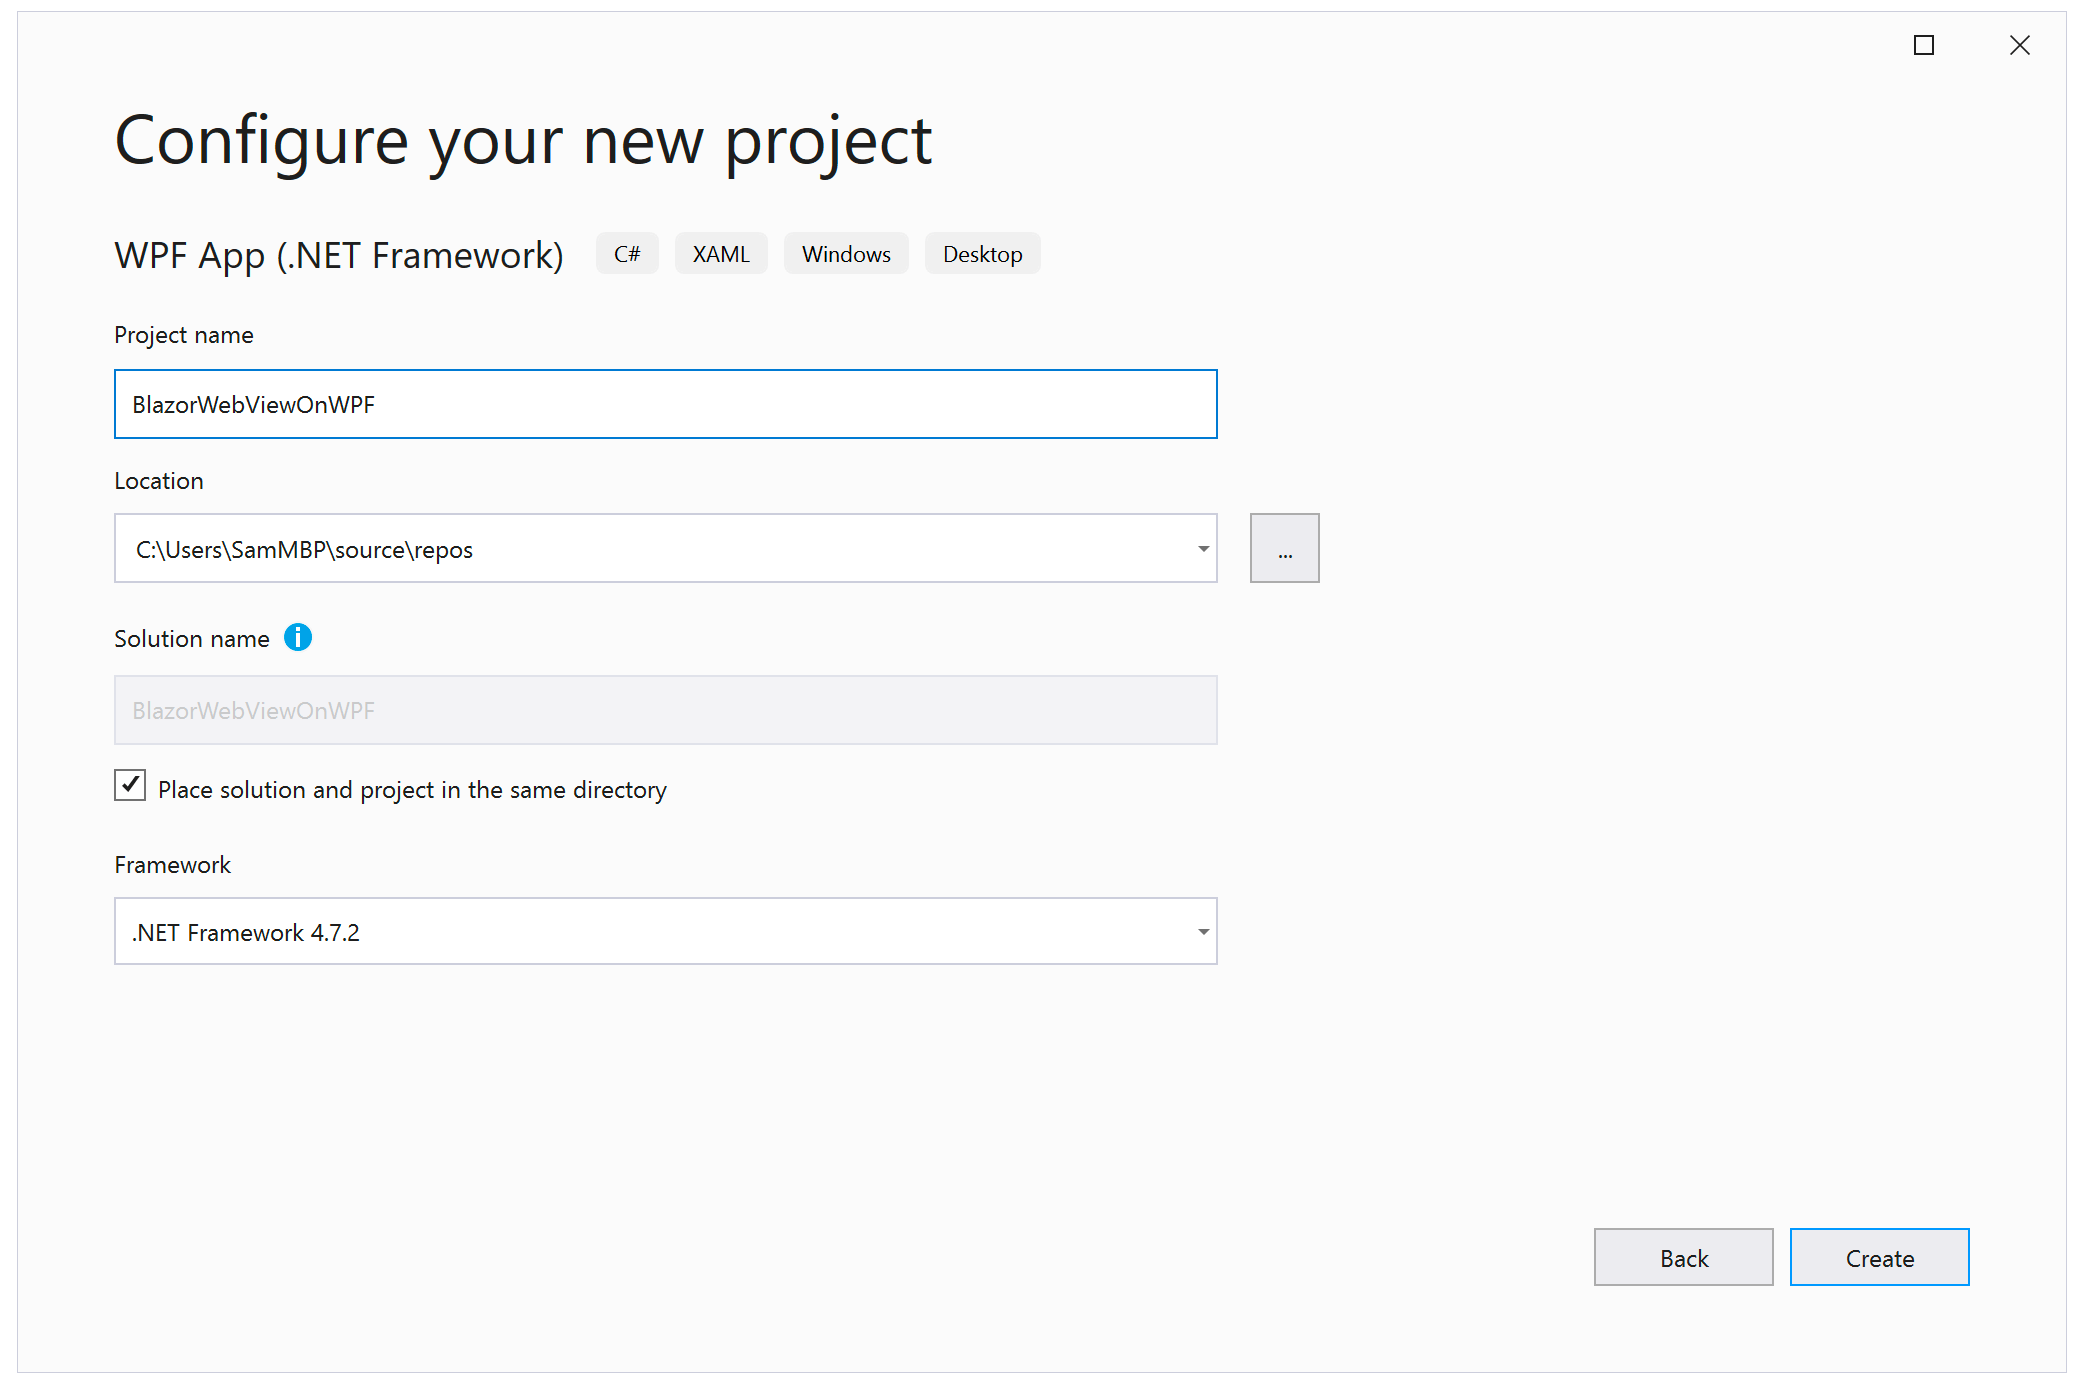 Screen for Configure your new project, WPF App (.NET Framework) with tags C#, XAML, Windows, Desktop. Project name, Location, Solution name, Framework fields are all filled.